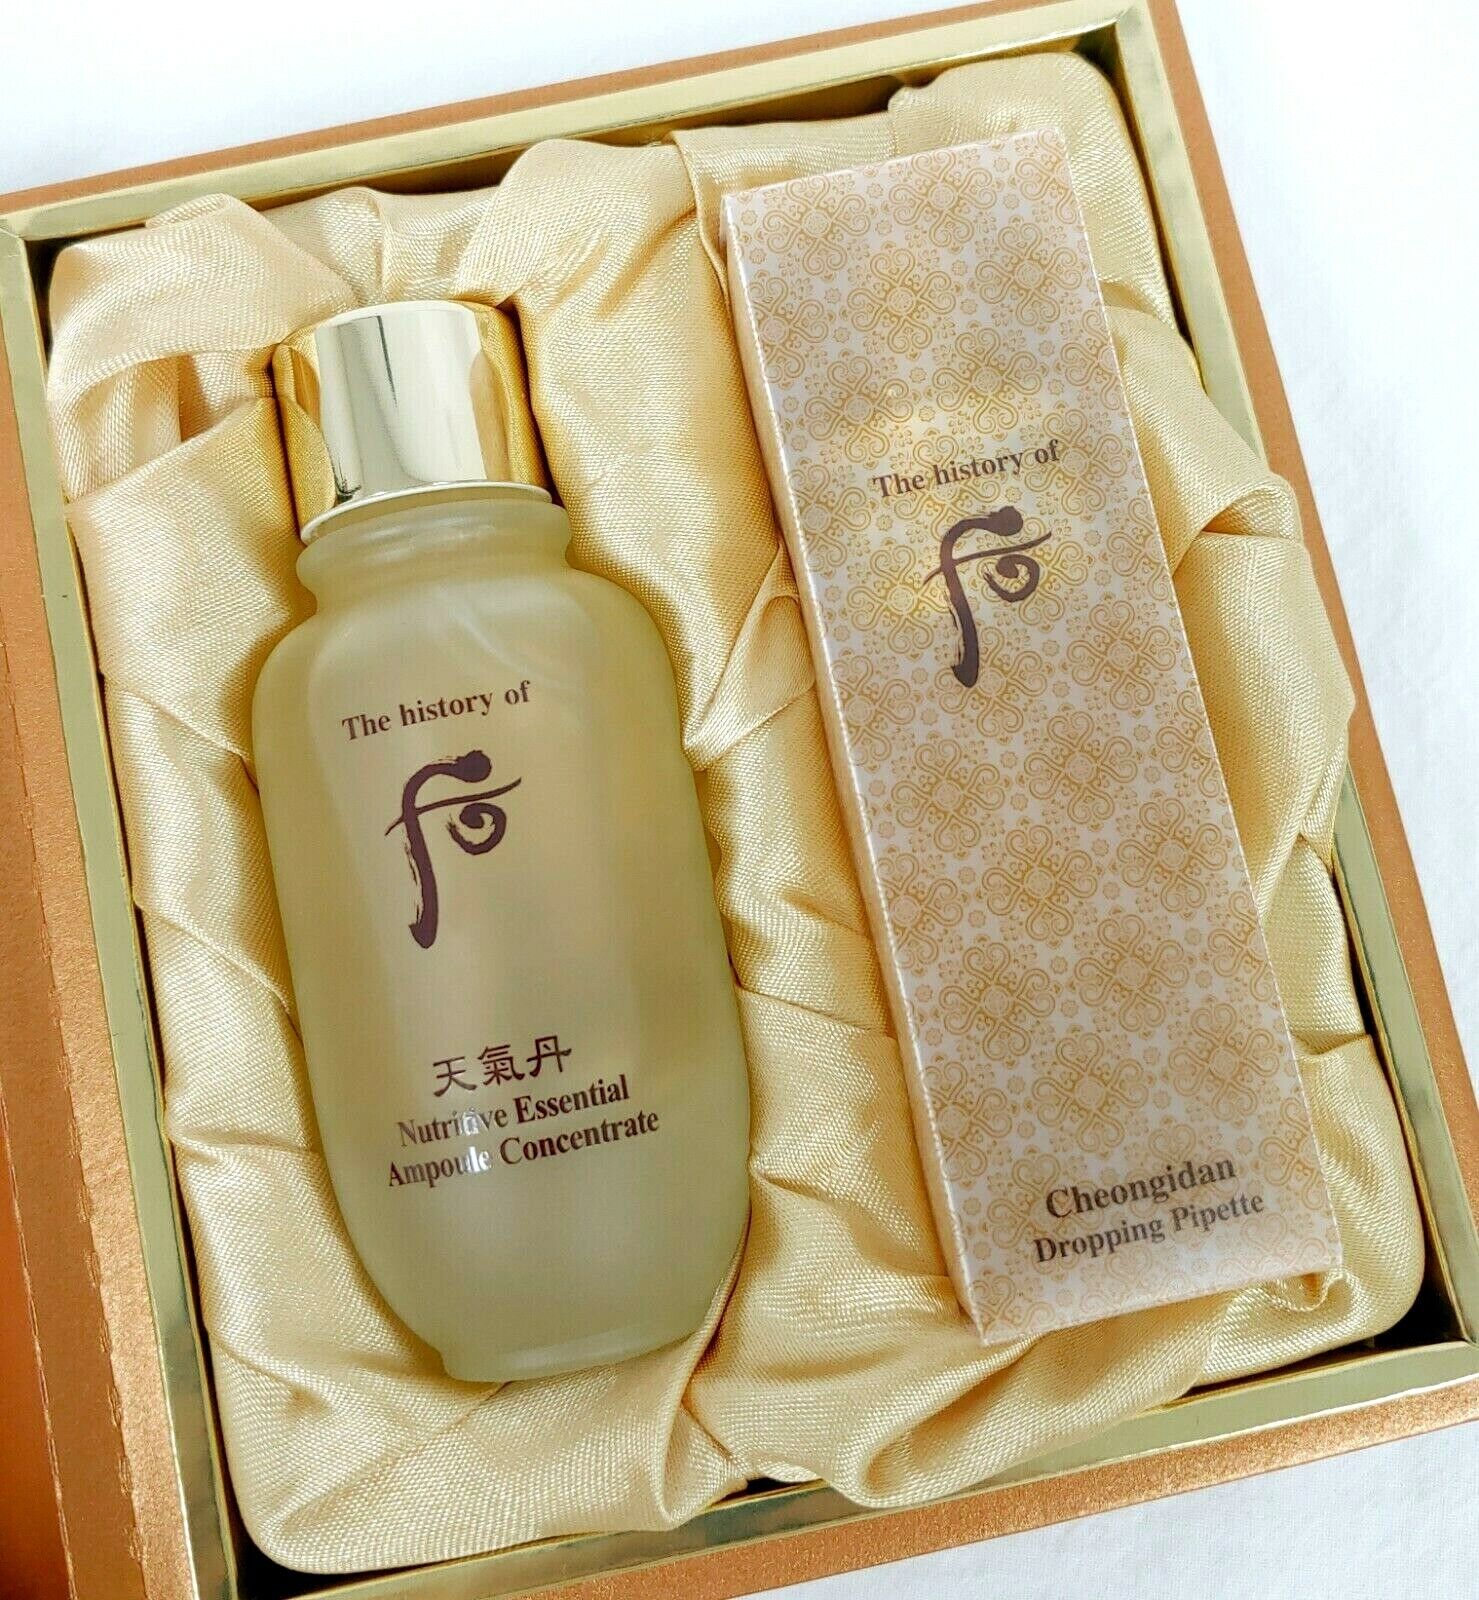 The history of whoo Cheongidan Hwahyun Nutritive Essential Ampoule Concentrate 30ml - DODOSKIN